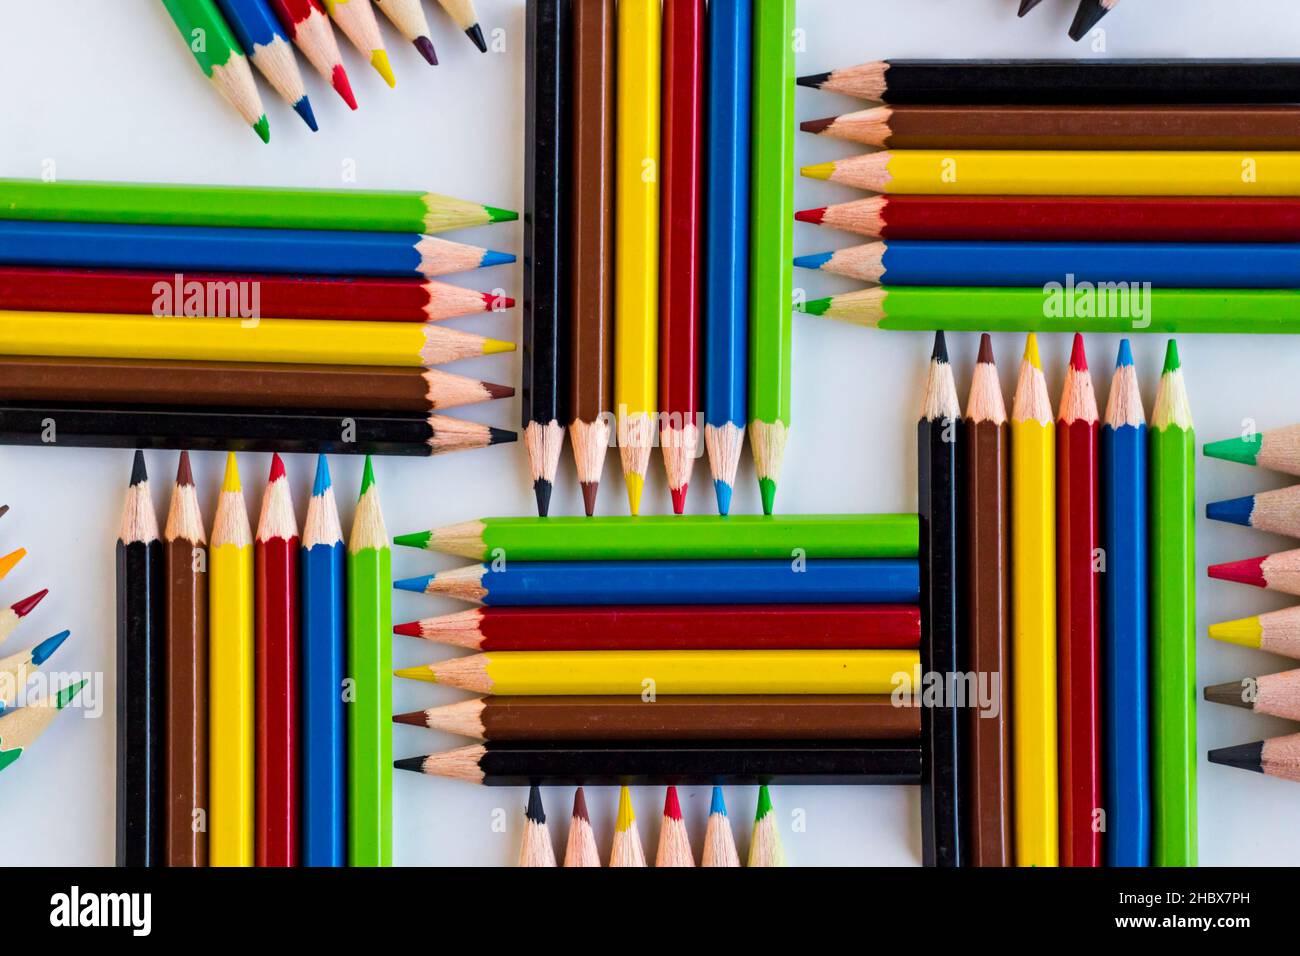 Colorful crayons,pencils designed group of five on the white surface,top view. Stock Photo